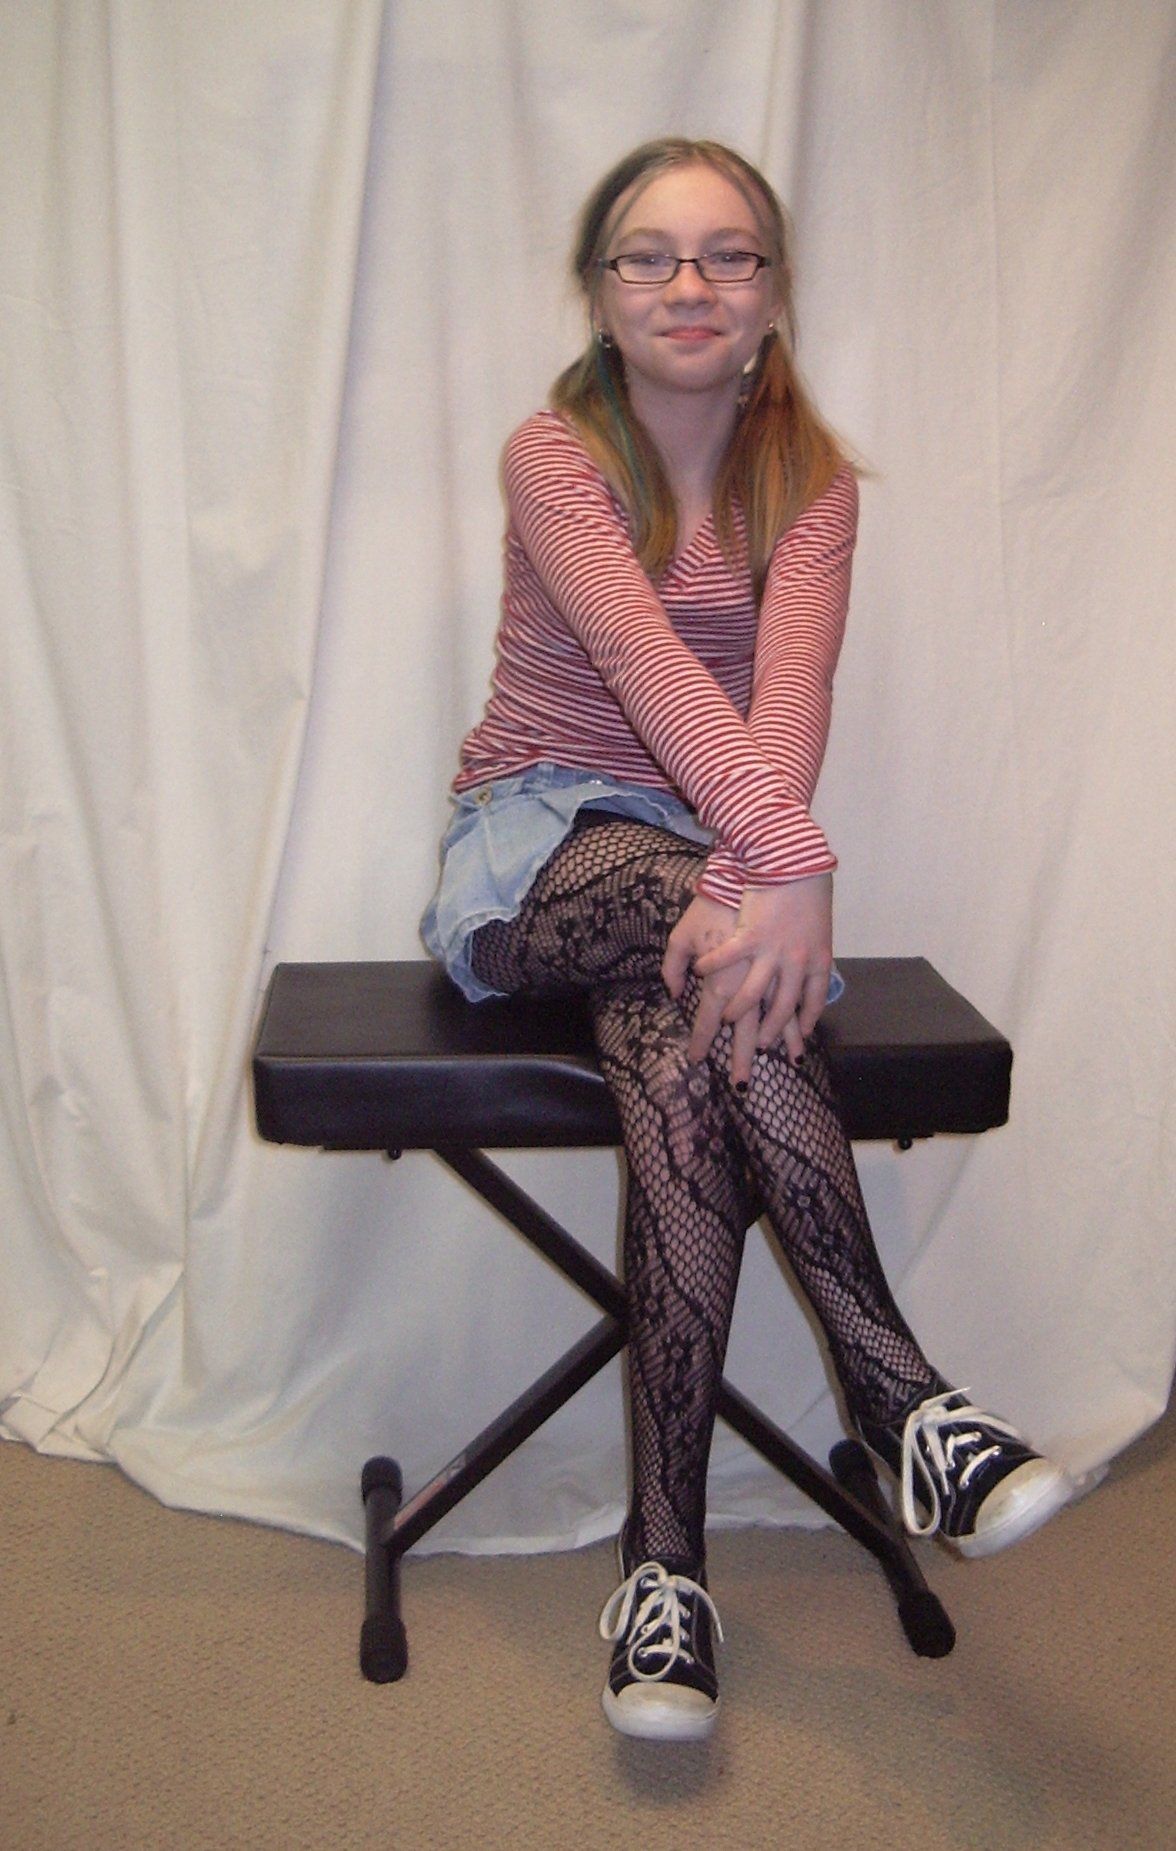 The P. reccomend Daughter wearing pantyhose